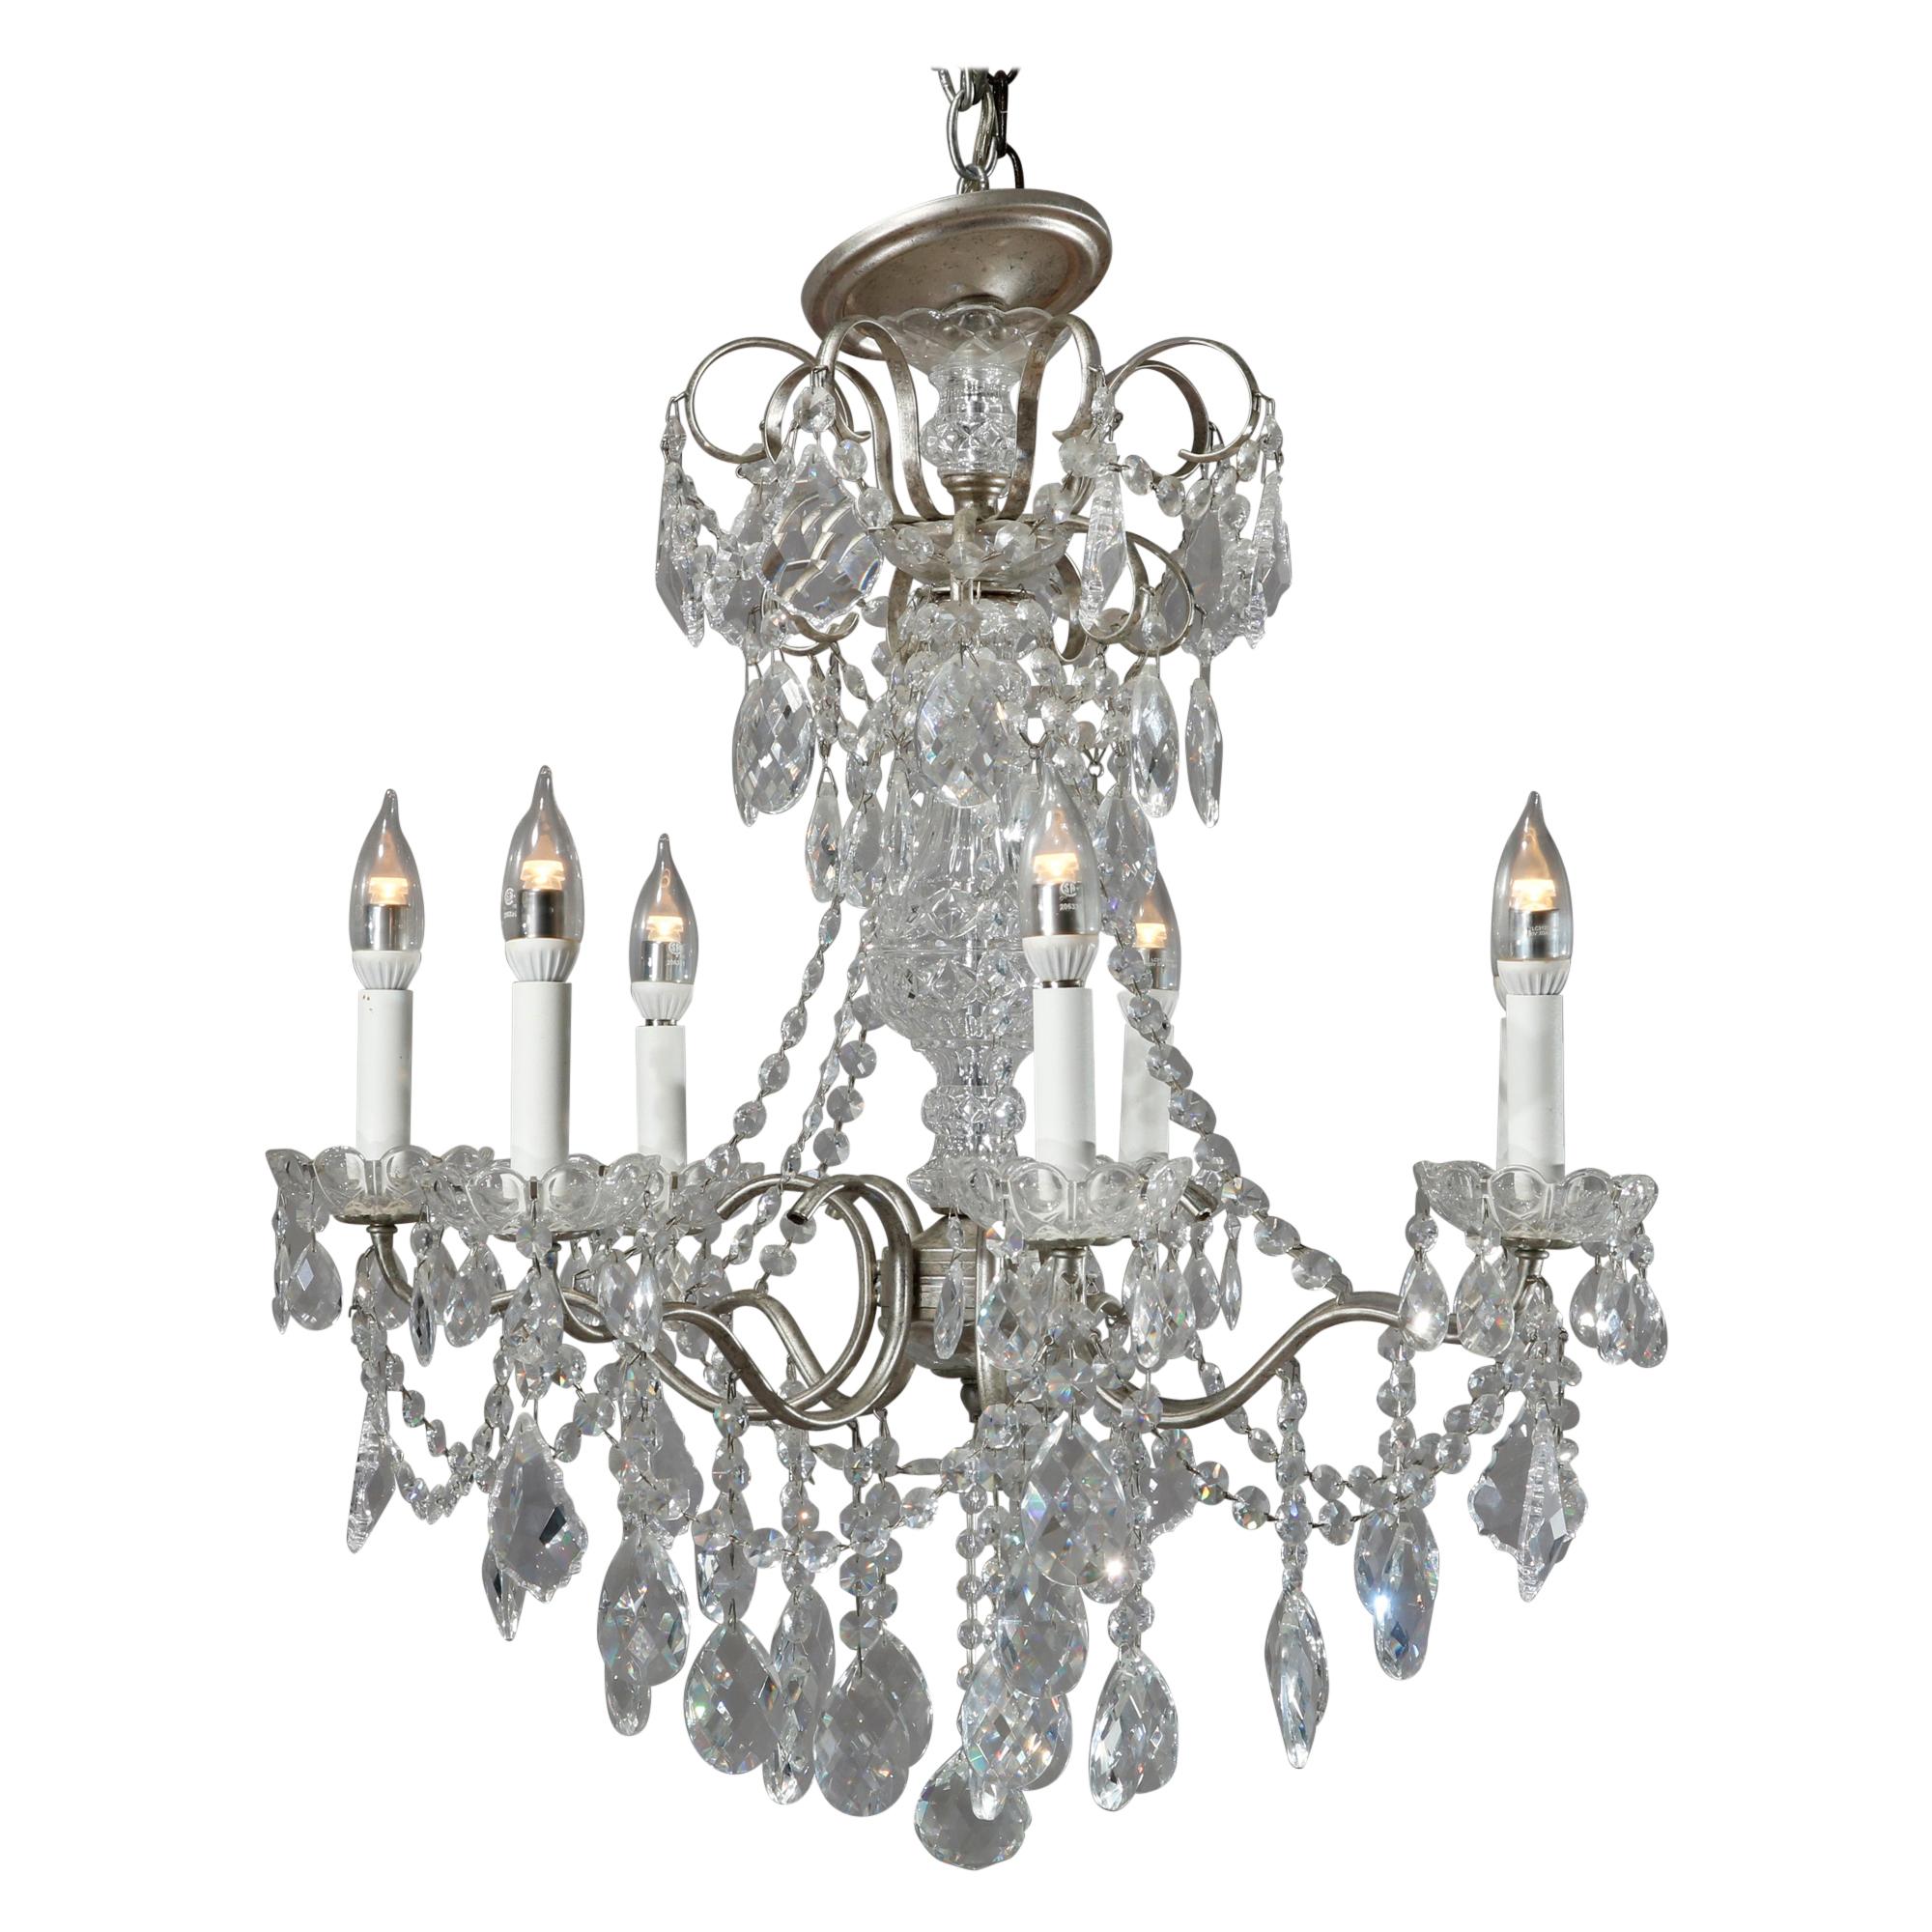 Vintage French Silver Gilt and Cut Crystal Chandelier, 20th Century